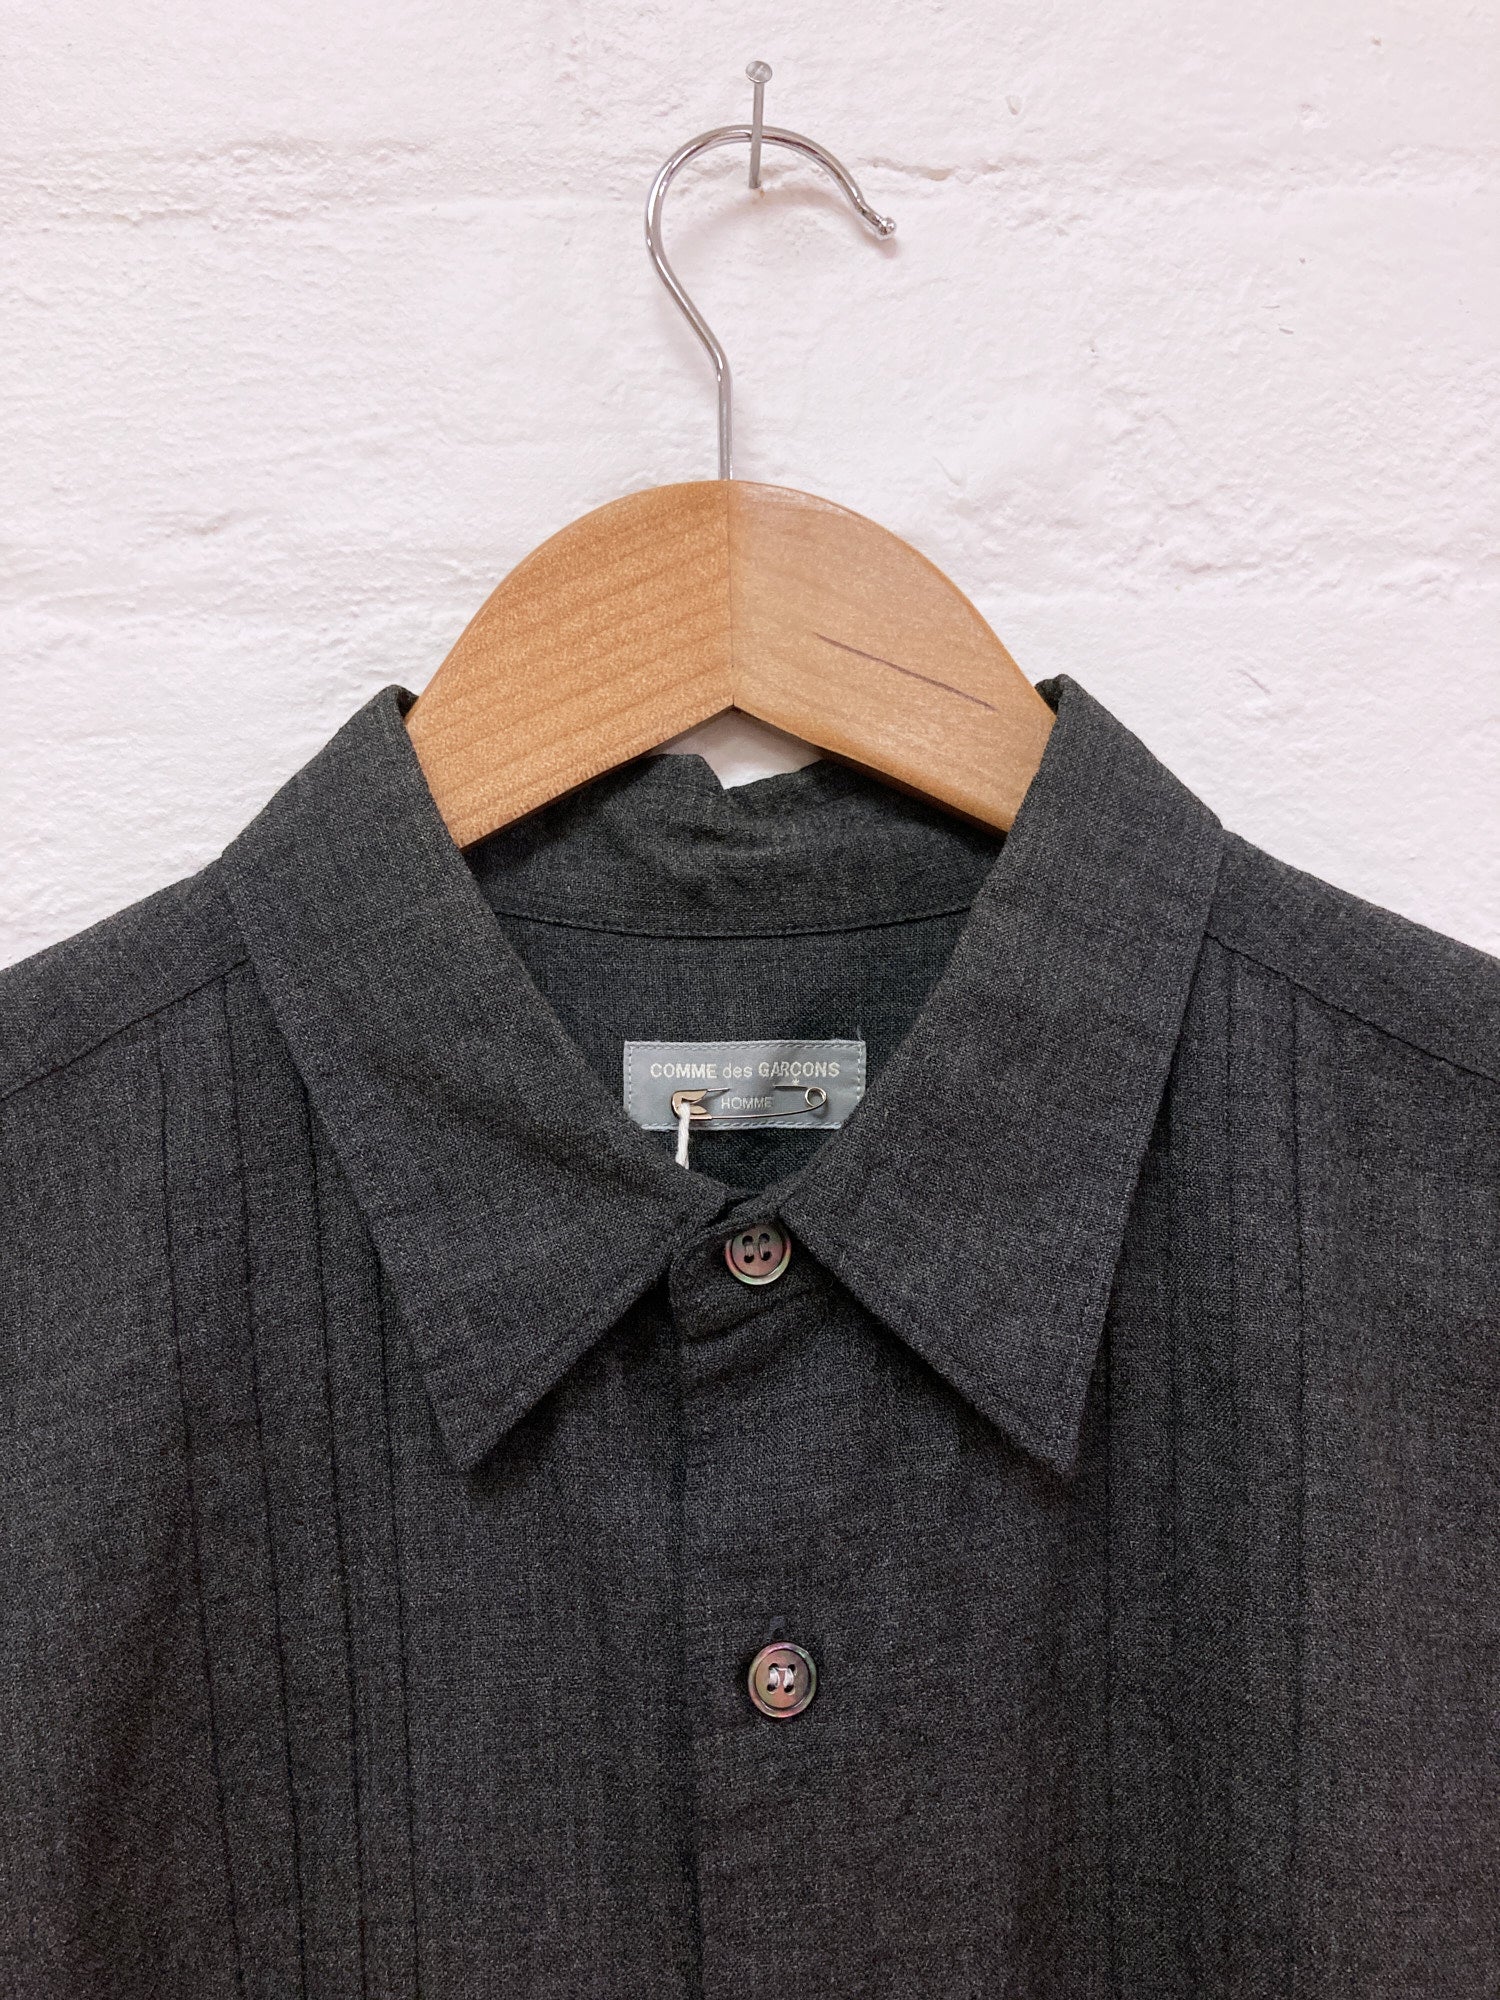 Comme des Garcons Homme 1998 charcoal grey wool pintuck shirt - L M